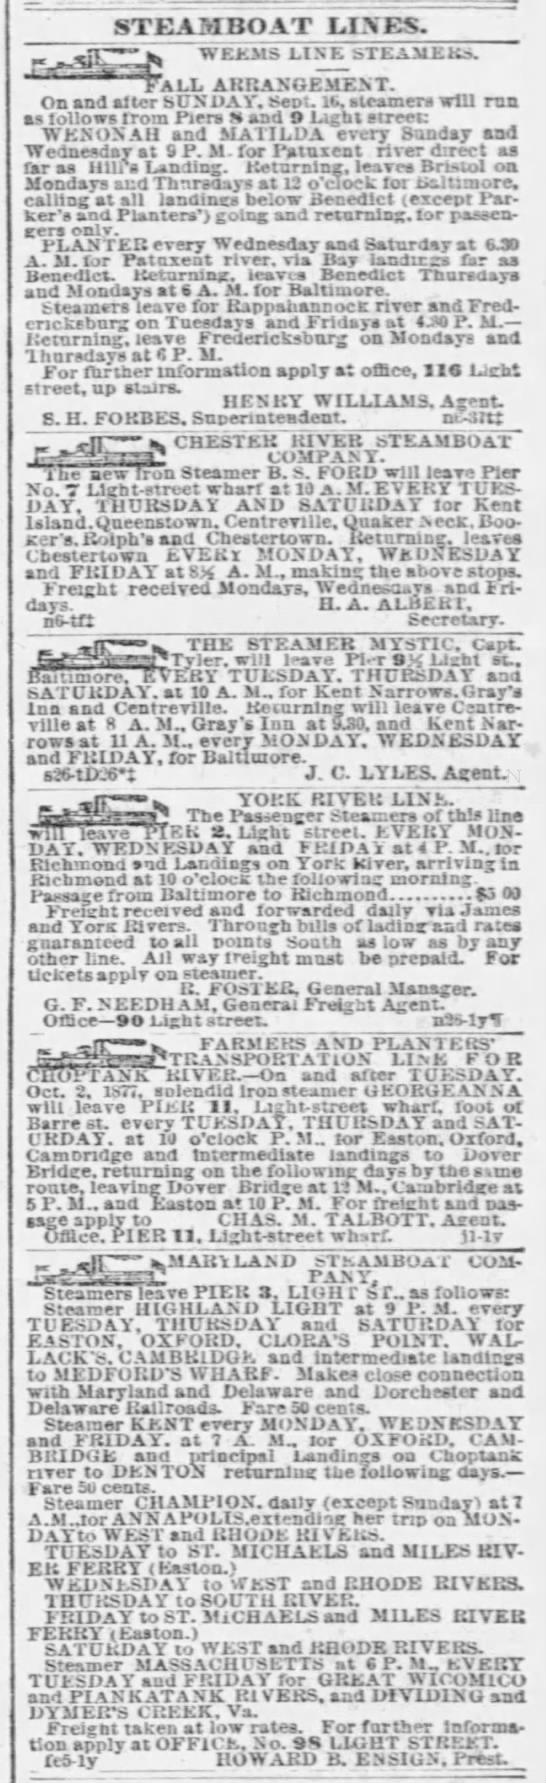 Steamboat Lines from Baltimore
Baltimore Sun - December 1877 - 